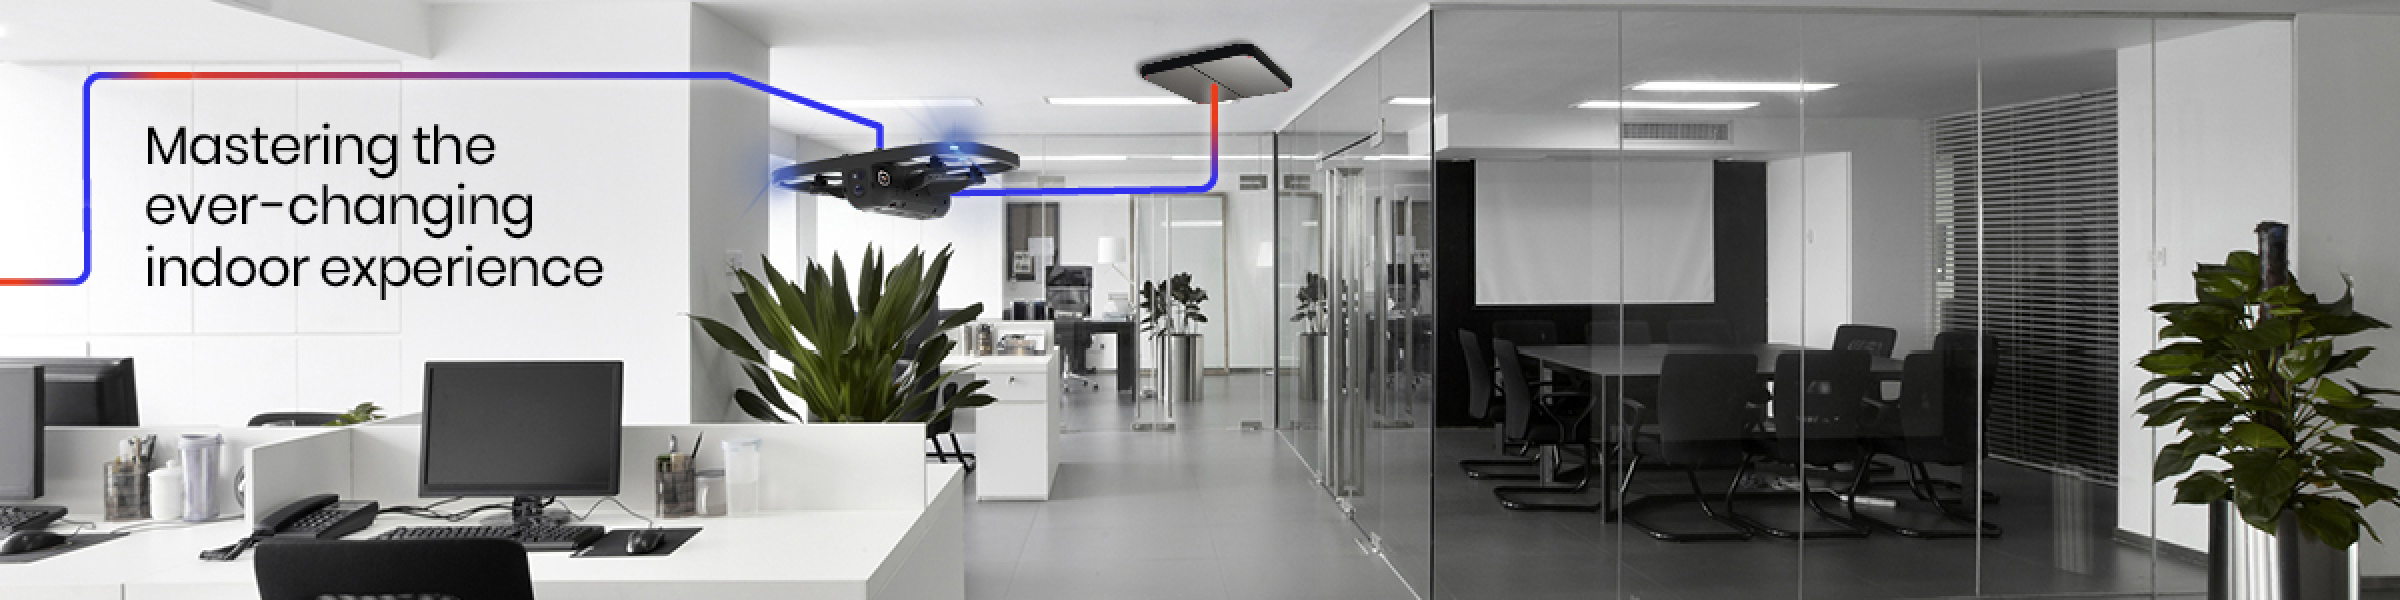 Office drone flight path and ceiling recharge point